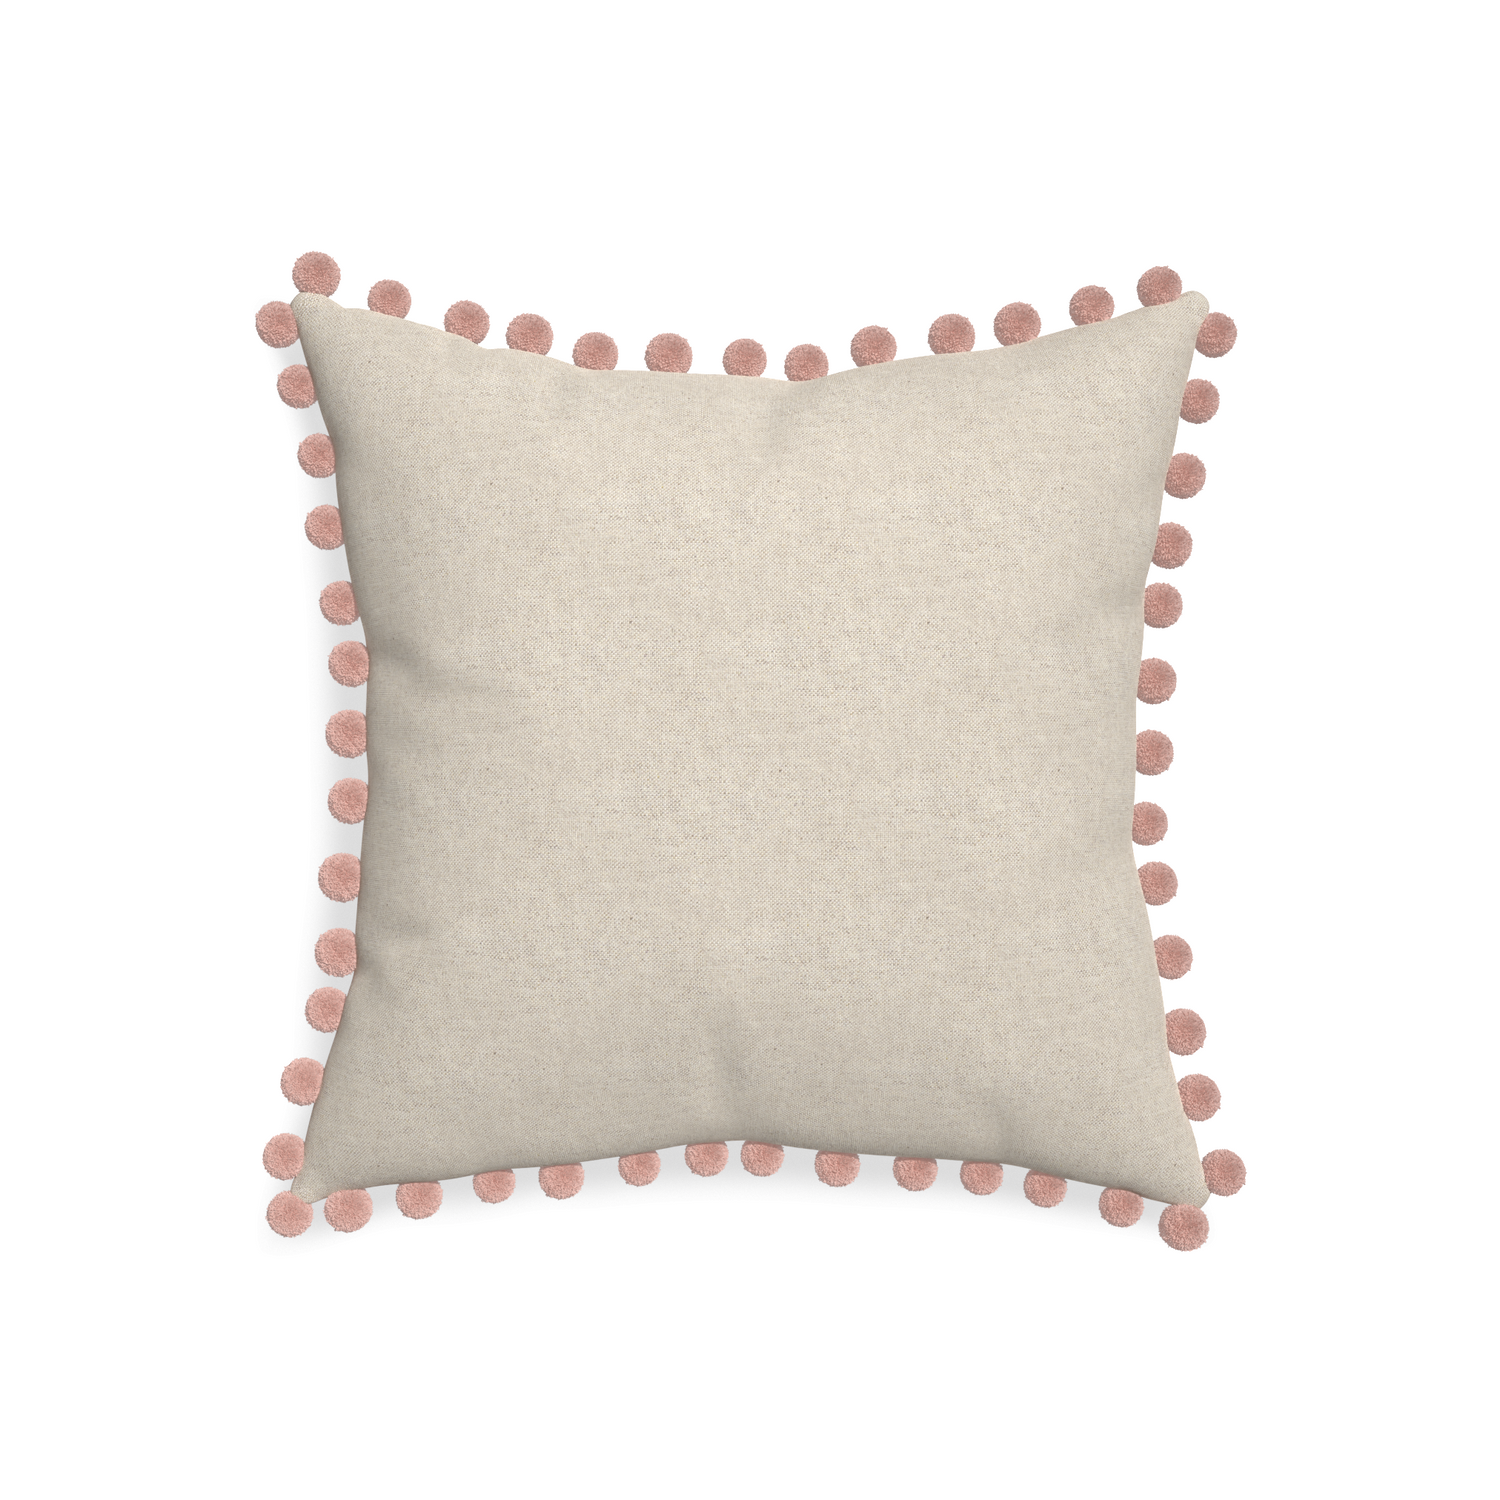 20-square oat custom light brownpillow with rose pom pom on white background